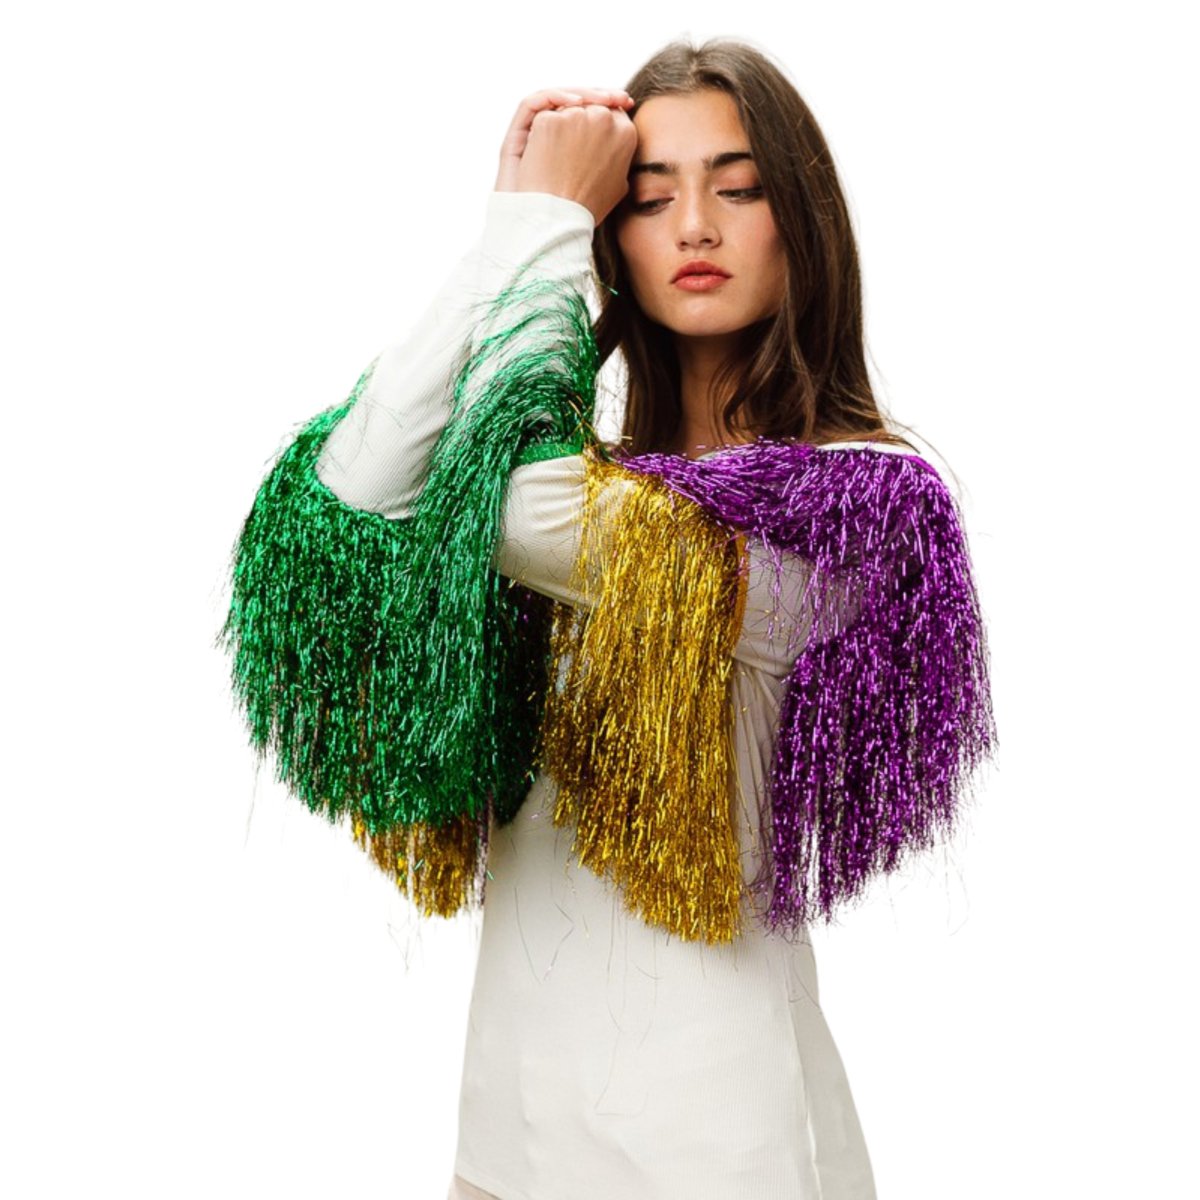 Mardi Gras White Top With Colorful Tiered Tinsel Fringe - Mardi Gras Apparel